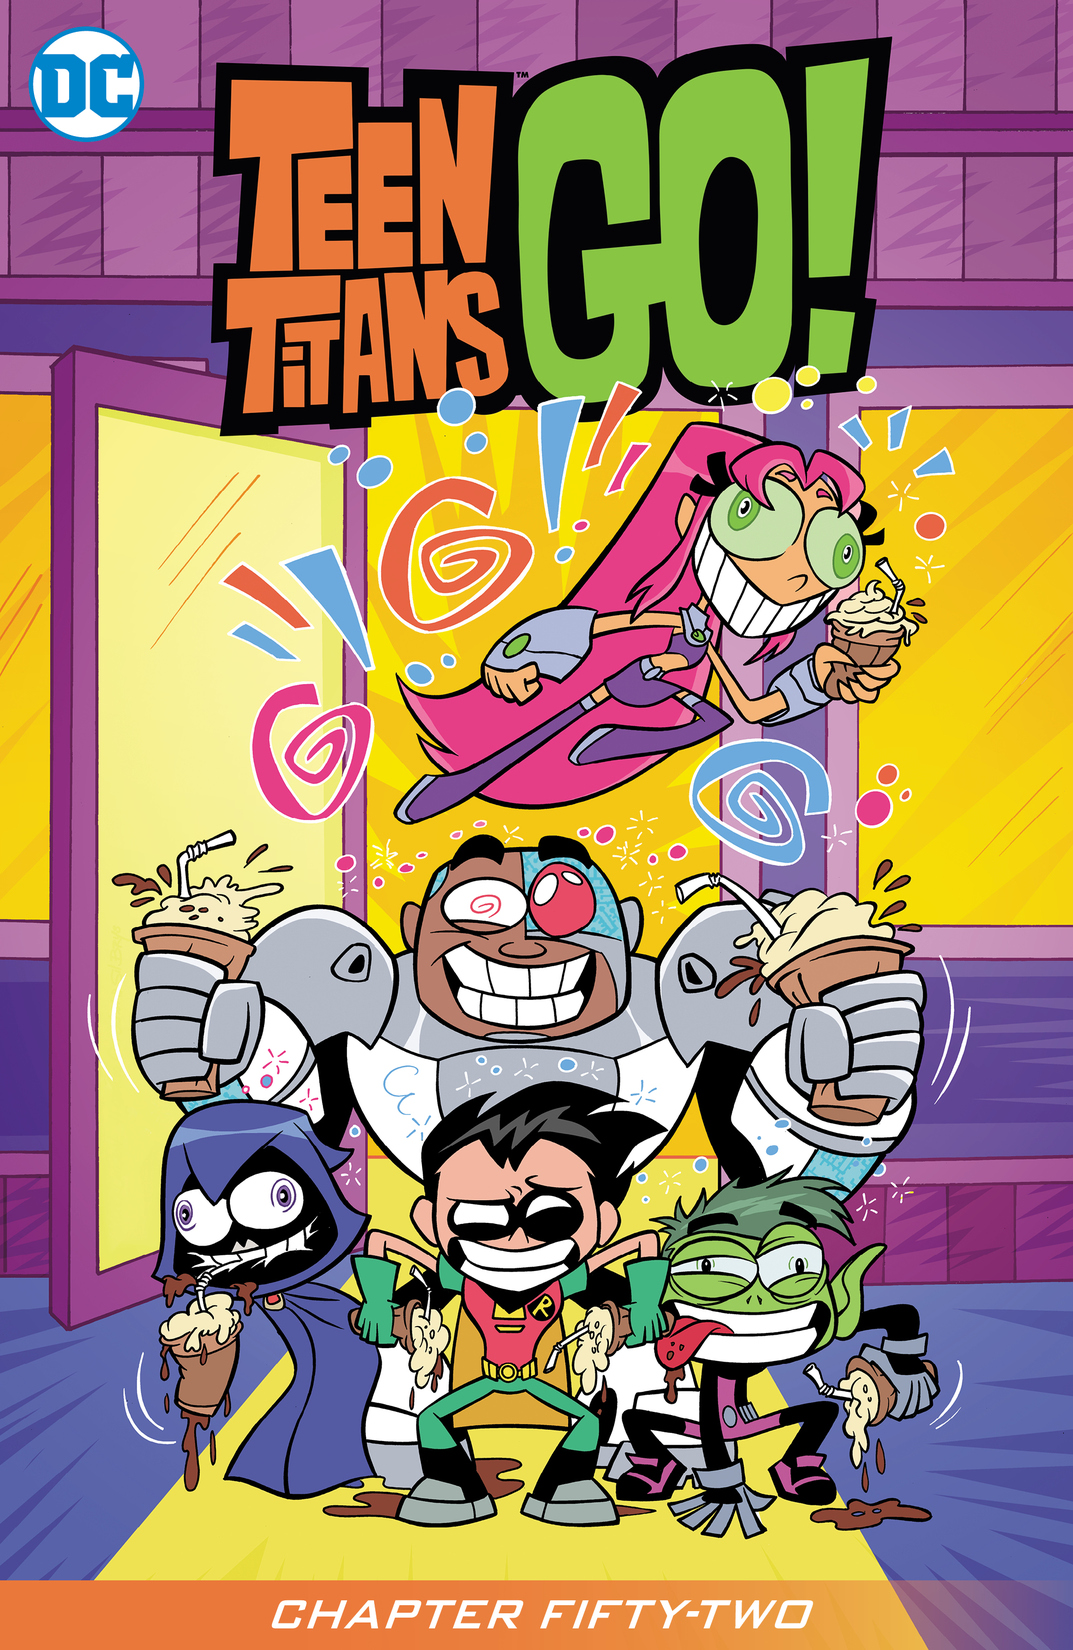 Teen Titans Go! (2013-) #52 preview images